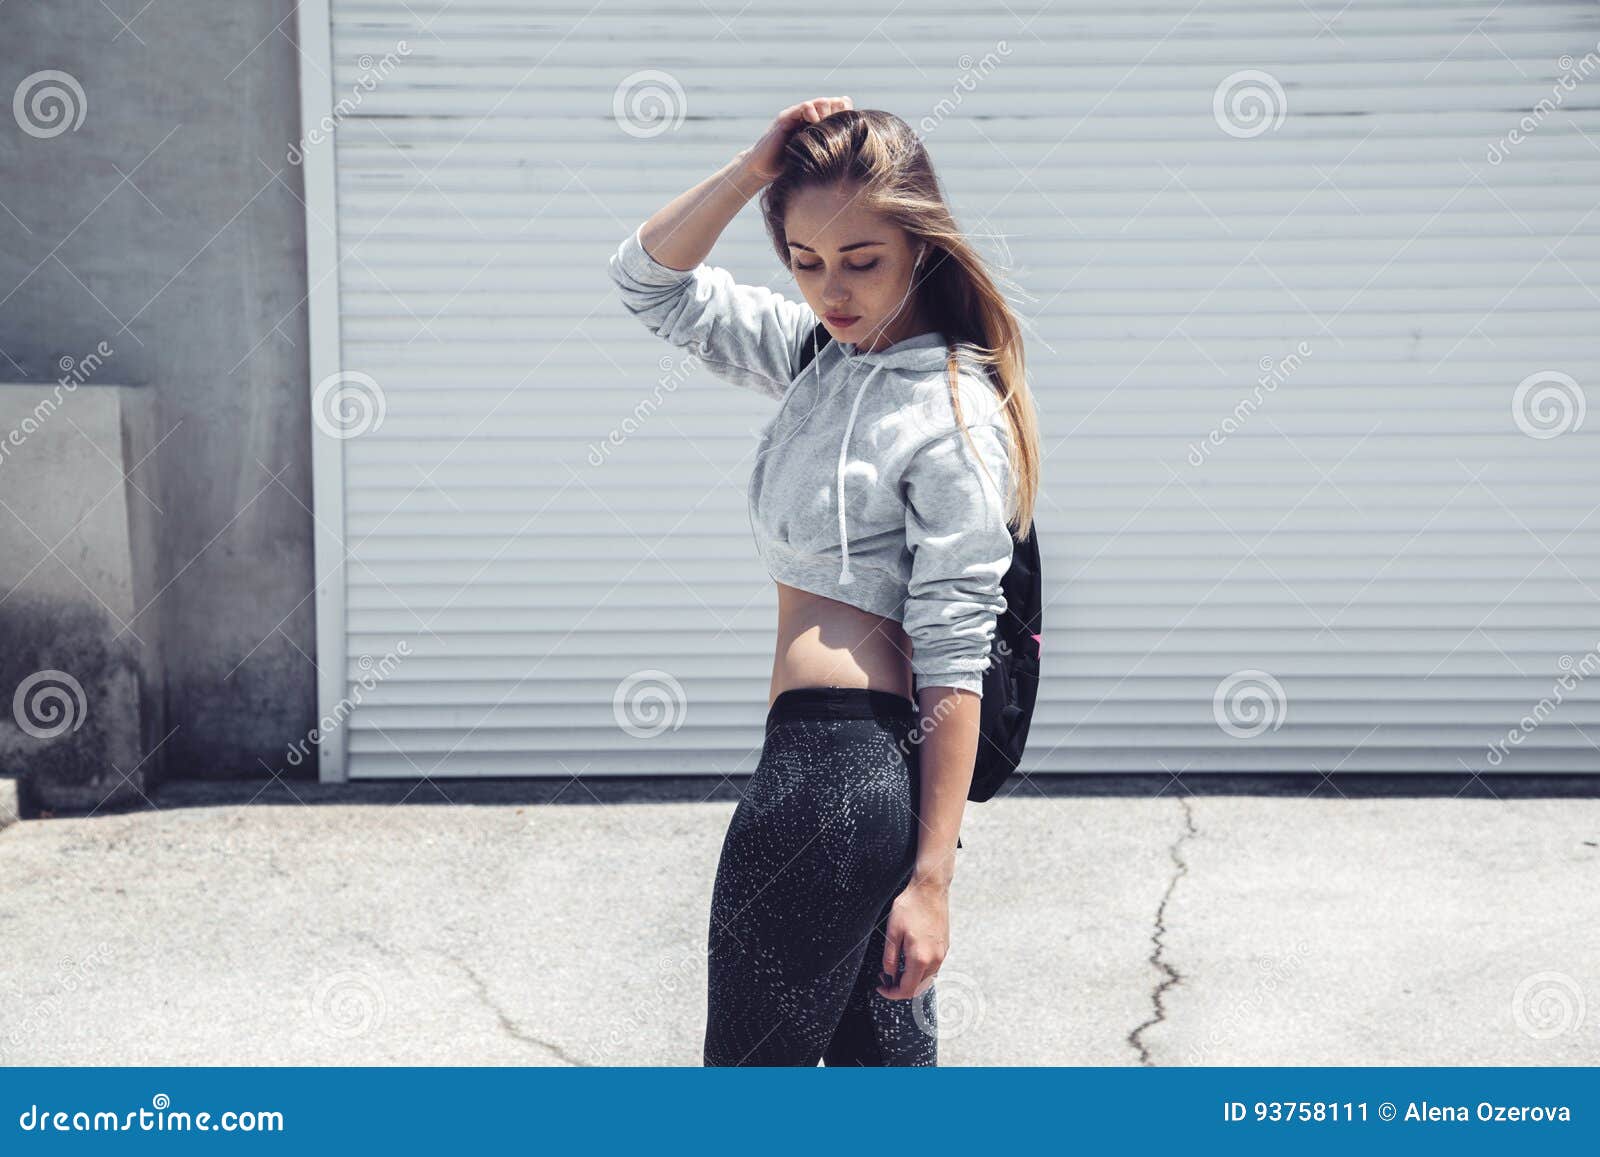 Fitness Sporty Girl Wearing Fashion Clothes Stock Image - Image of outside,  outdoor: 93758111